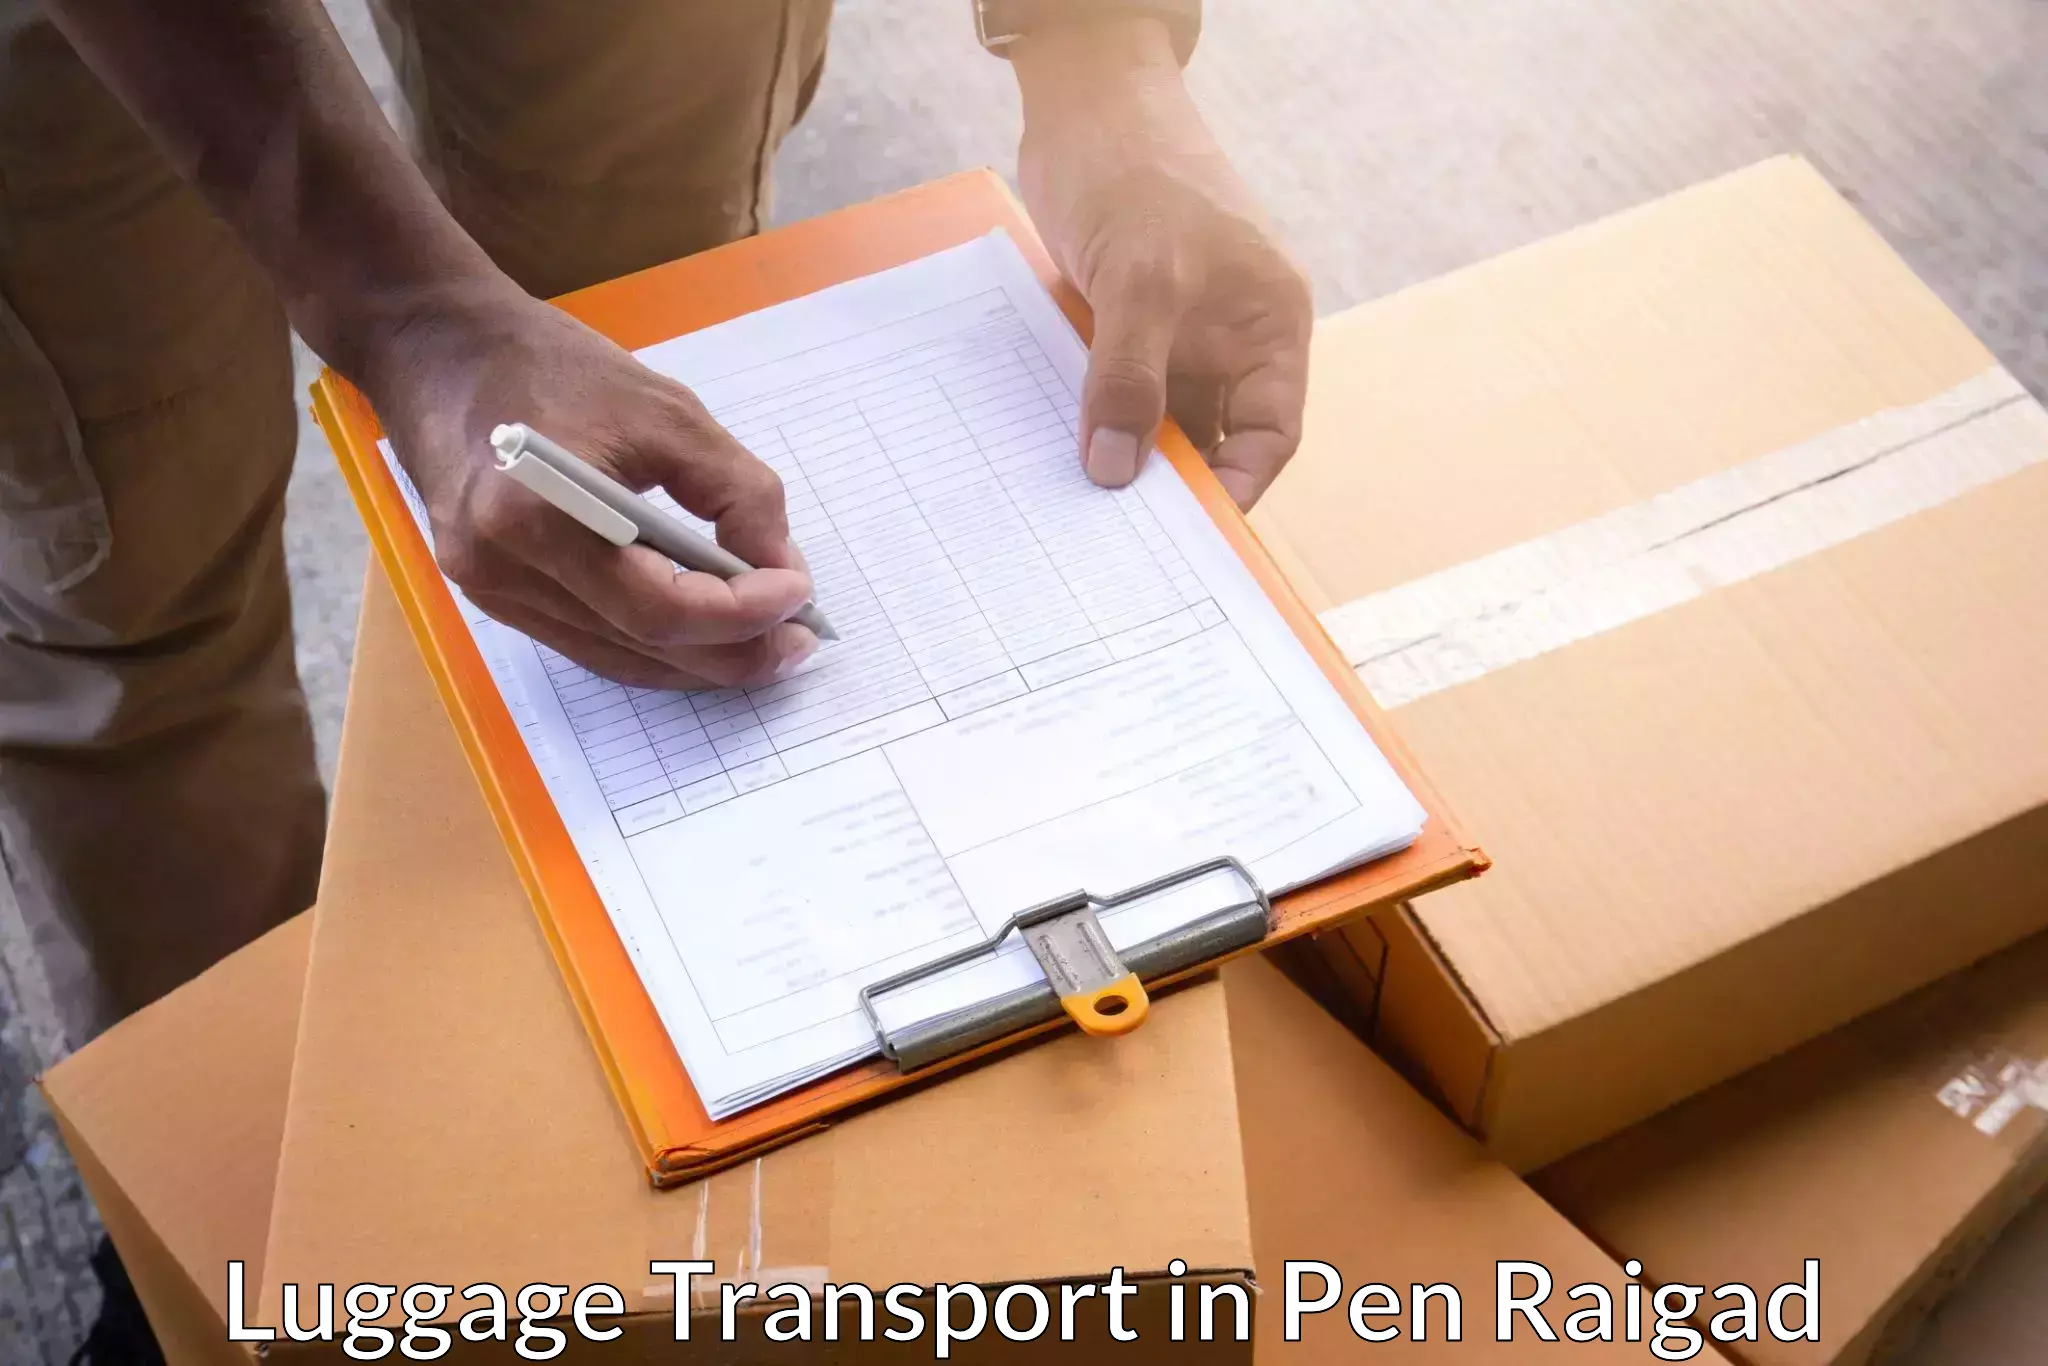 Timely baggage transport in Pen Raigad